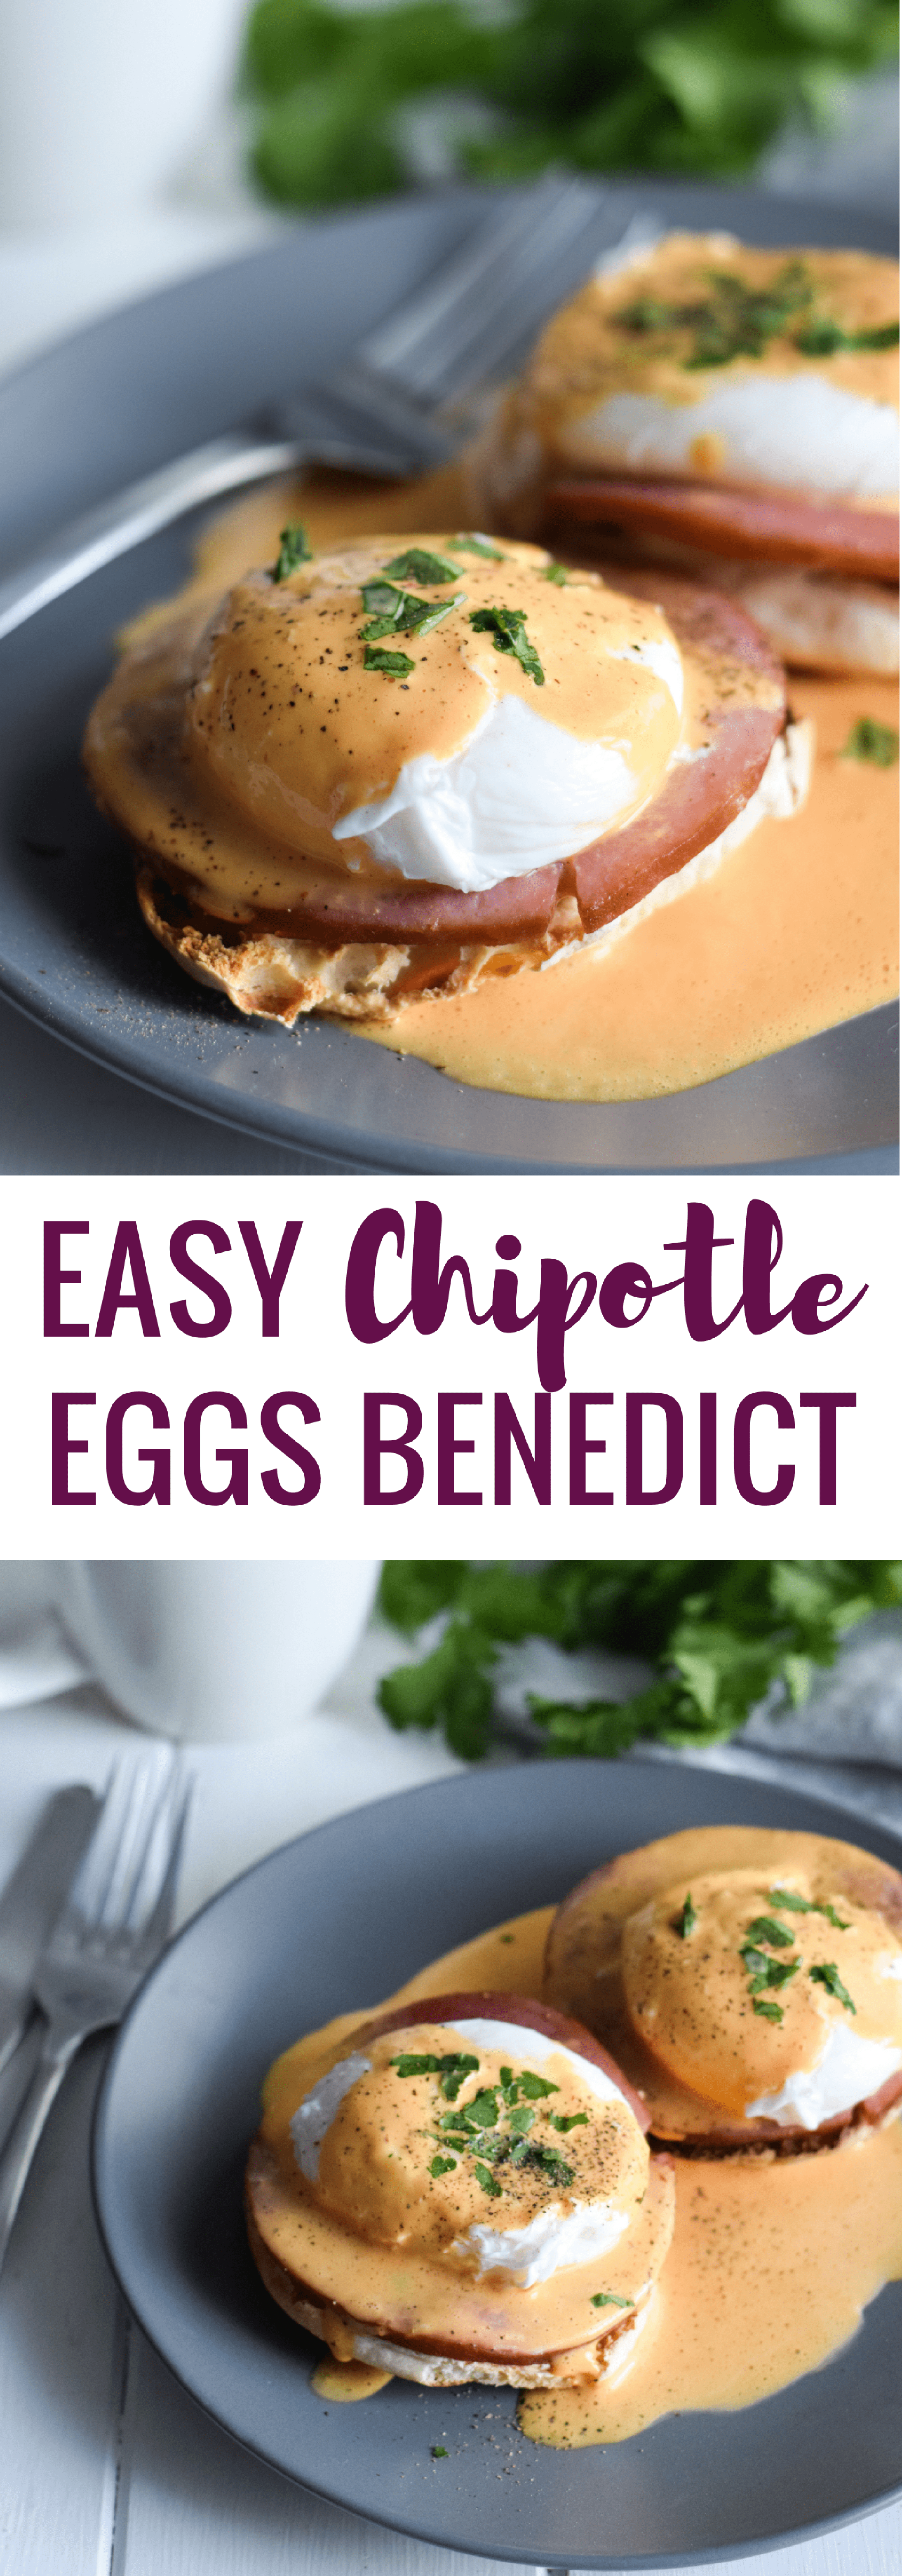 Chipotle Eggs Benedict - Isabel Eats {Easy Mexican Recipes}